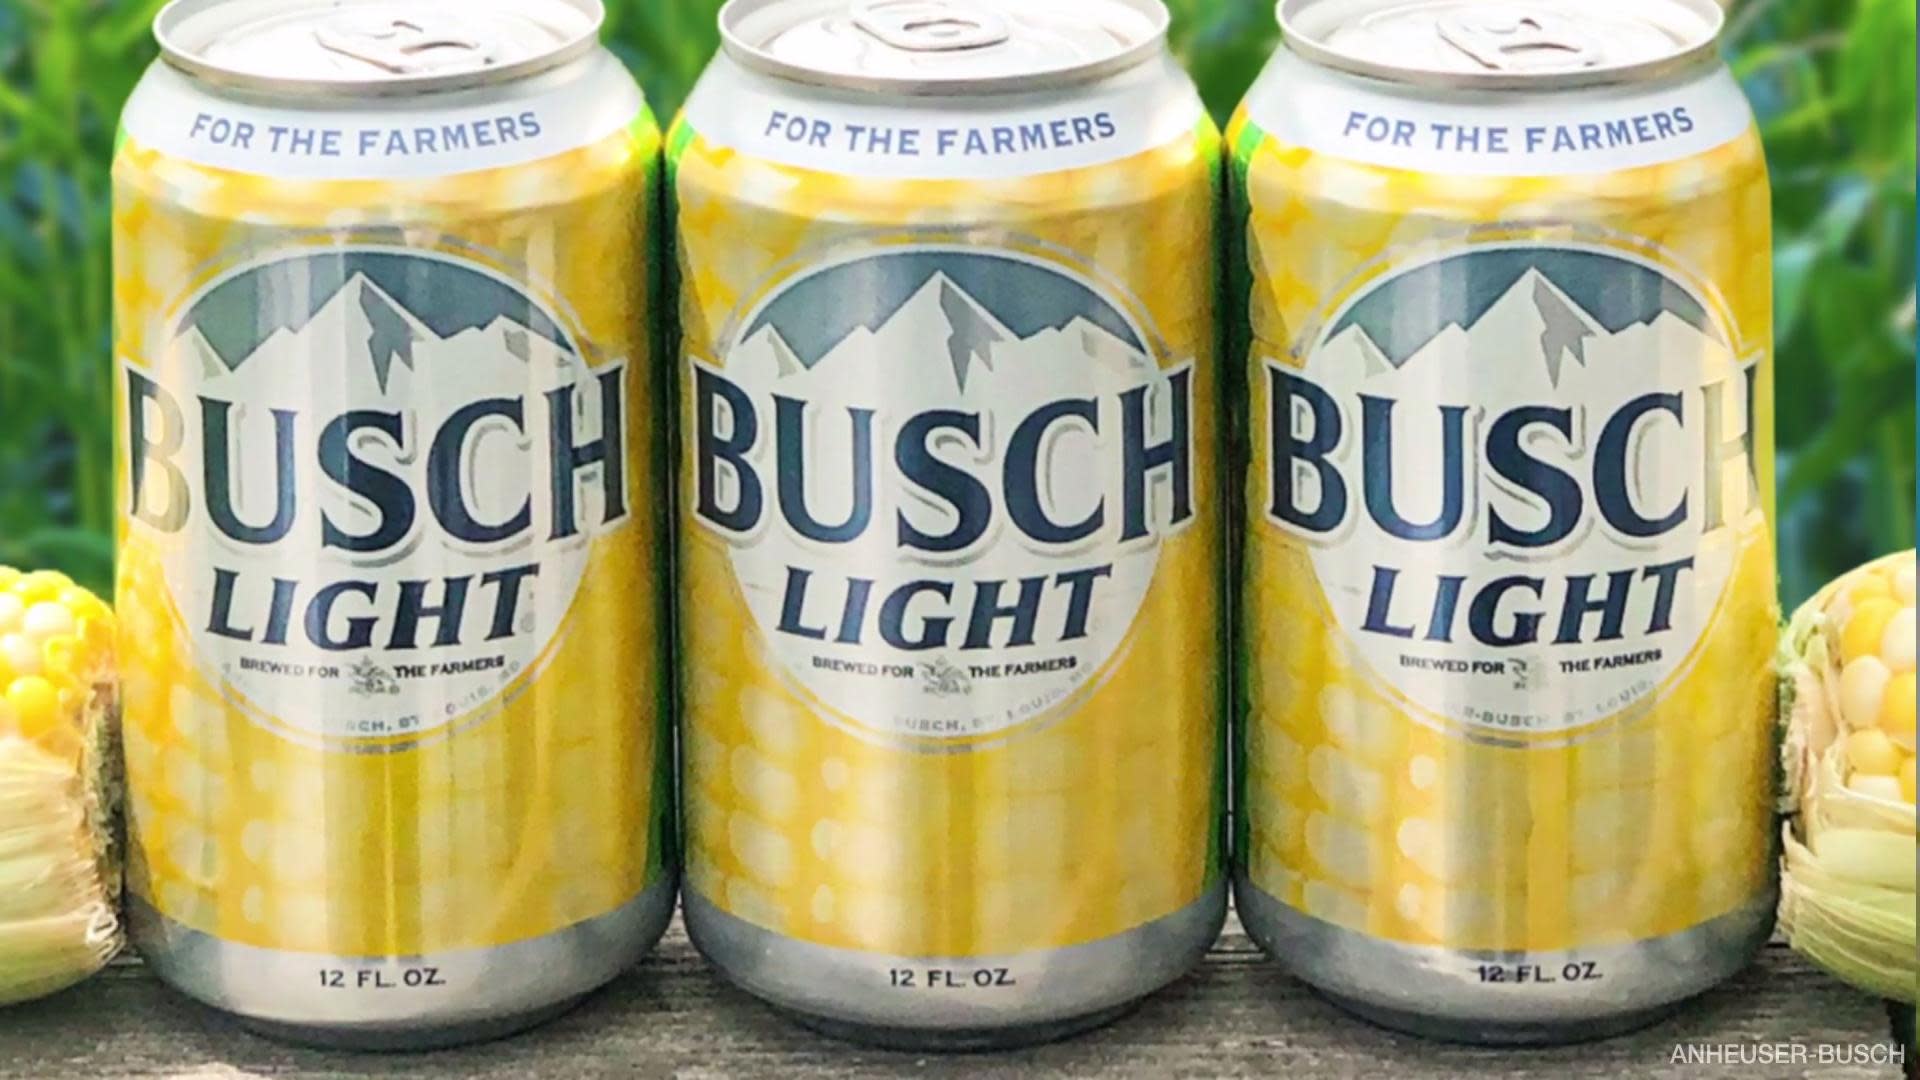 Busch Light's New Corn Cans Help Raise Money for Farmers in Need